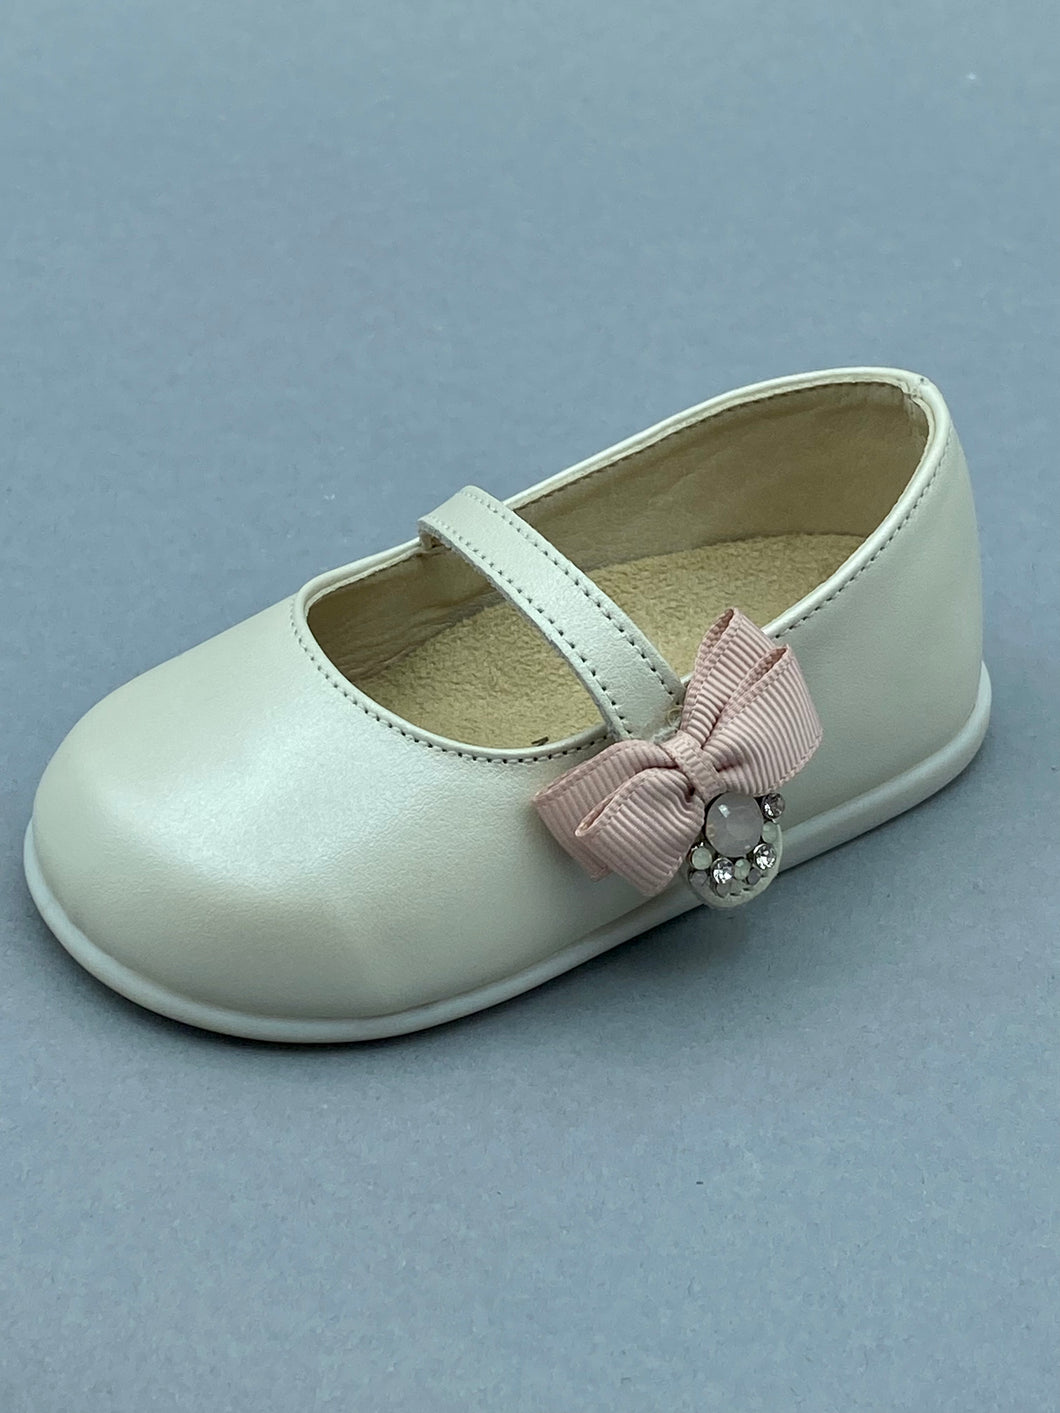 Baby Walker Leather Walking Shoe with Dusty Rose Bow and Rhinestone Leather Strap